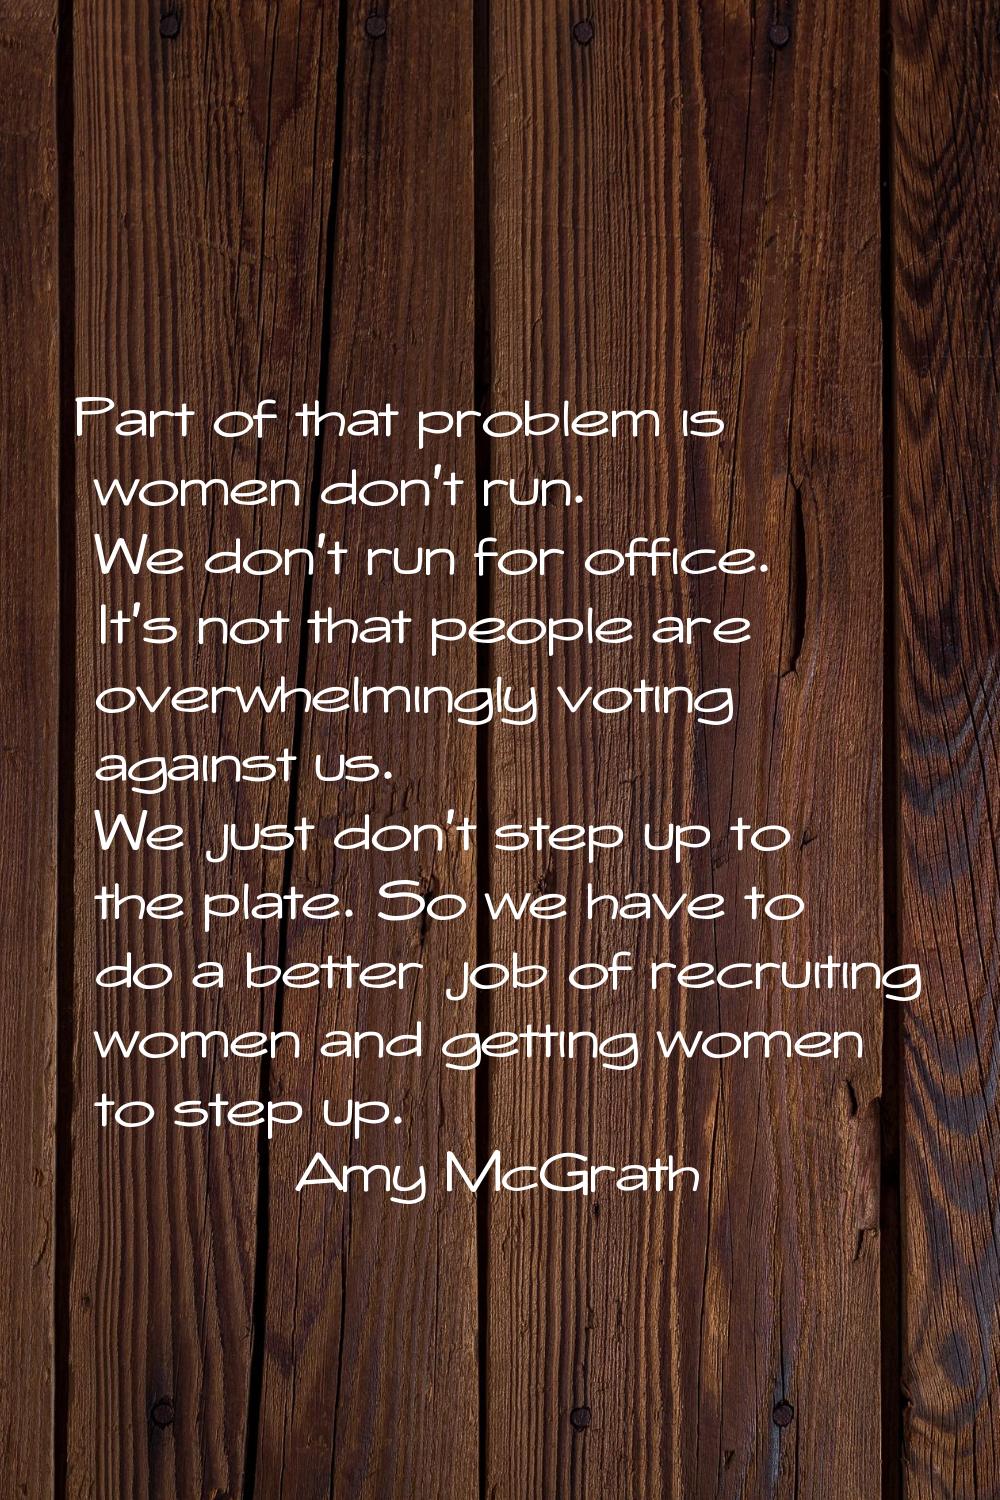 Part of that problem is women don't run. We don't run for office. It's not that people are overwhel